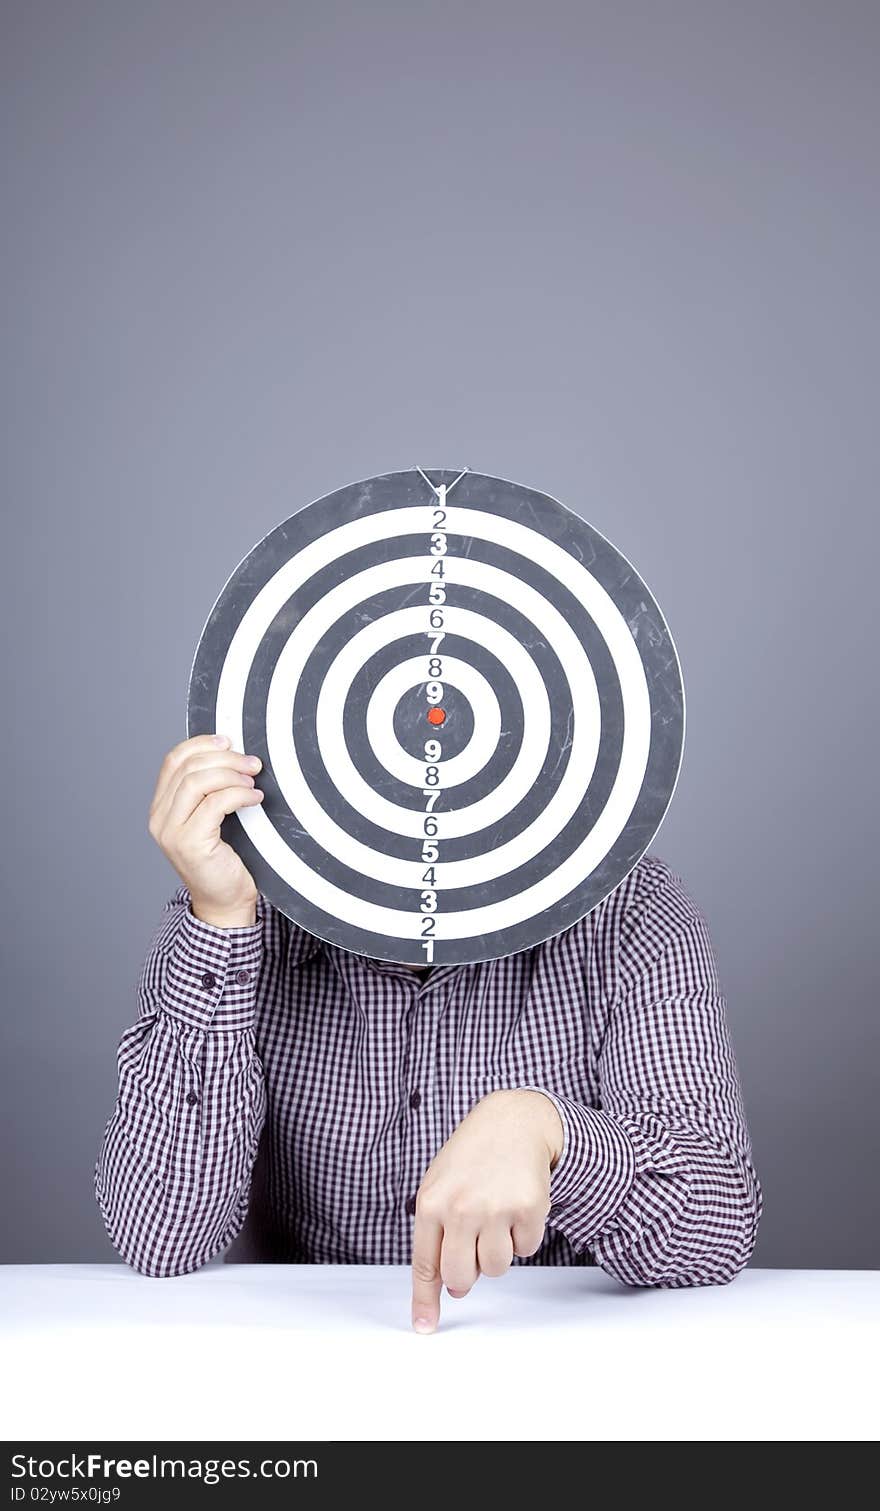 Boy with dartboard in place of head. Studio shot.